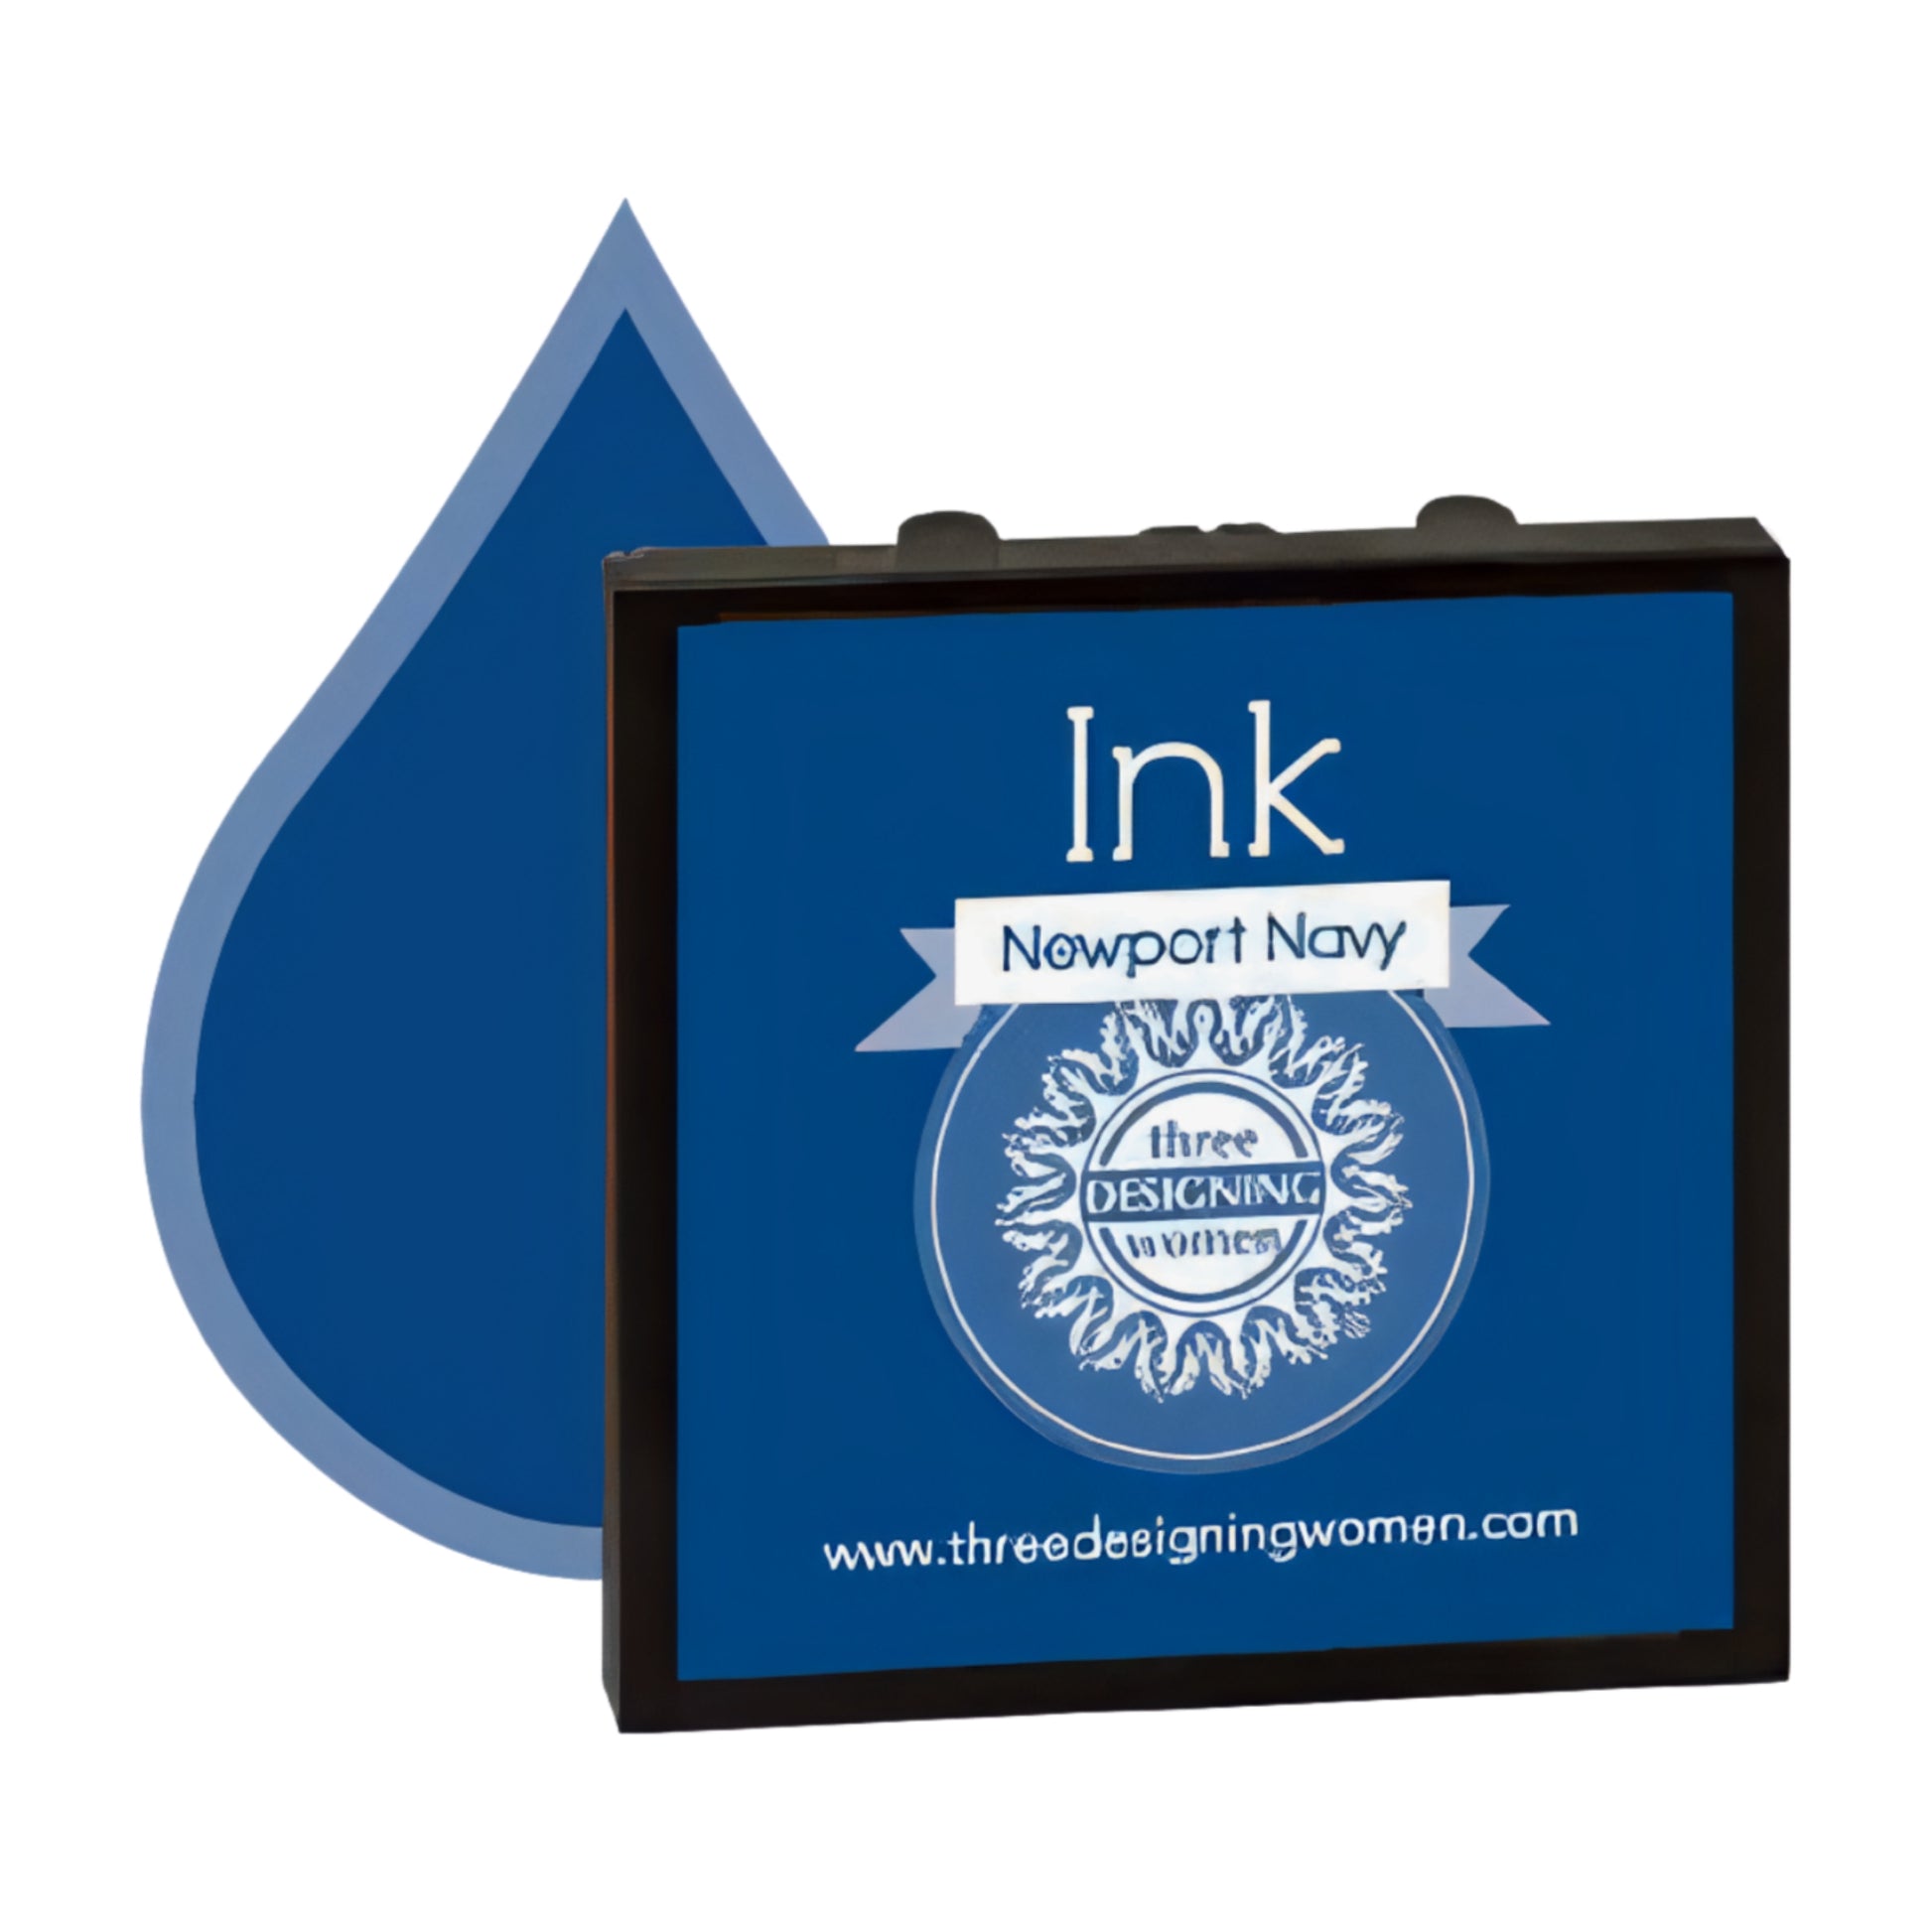 Ink Replacement Cartridge "Newport Navy" for Self-Inking Stampers Three Designing Women